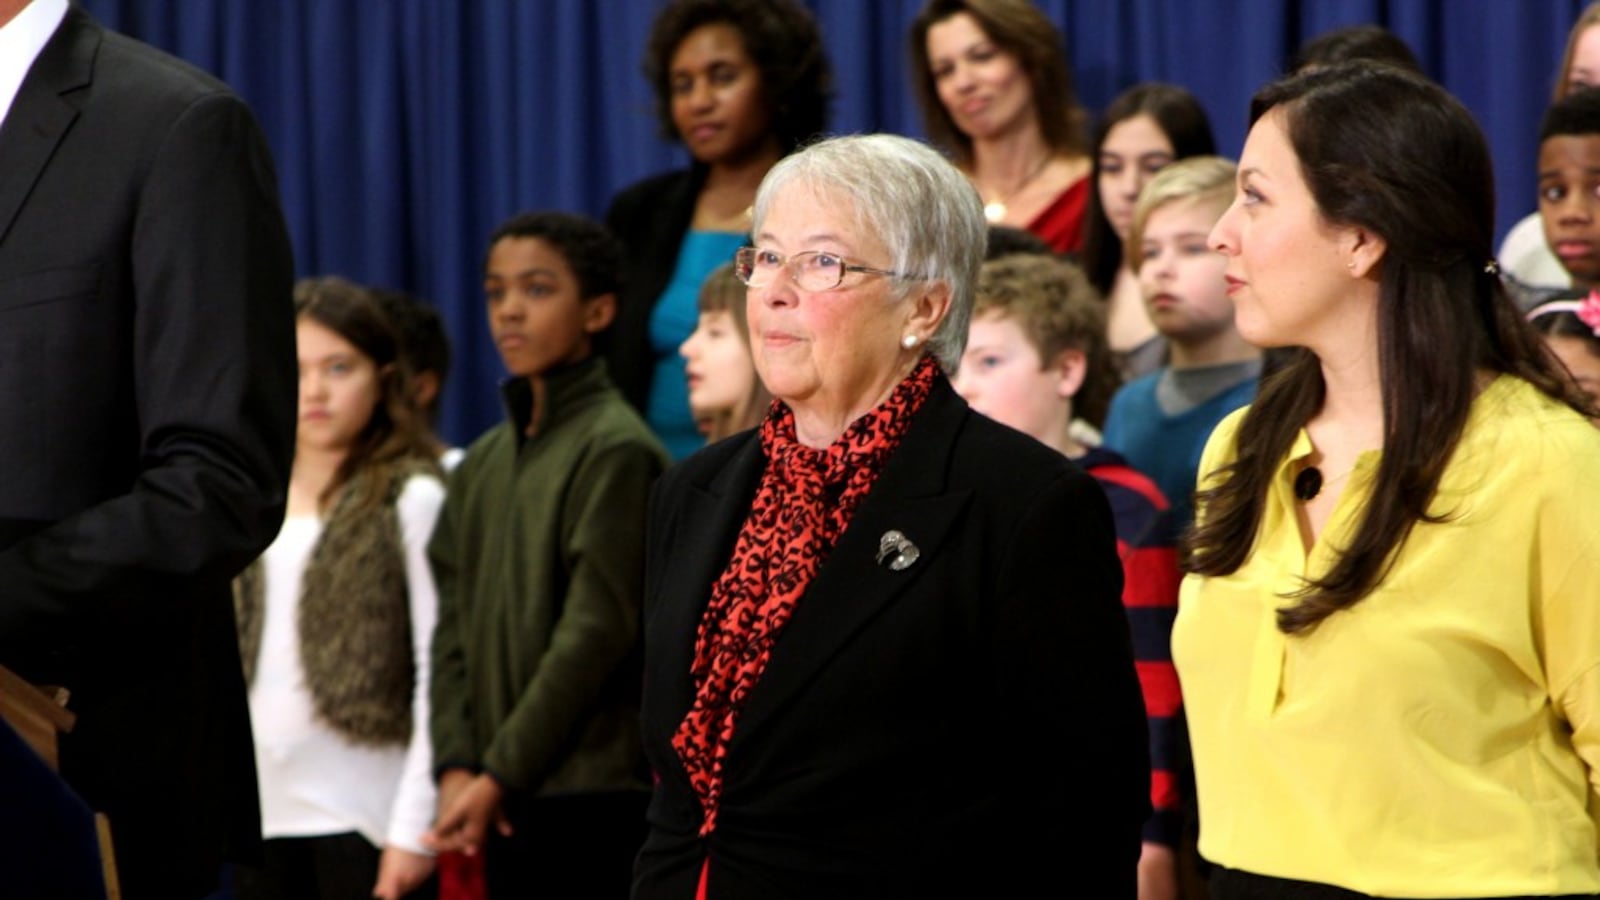 Carmen Fariña at an event this month where she was named schools chancellor.